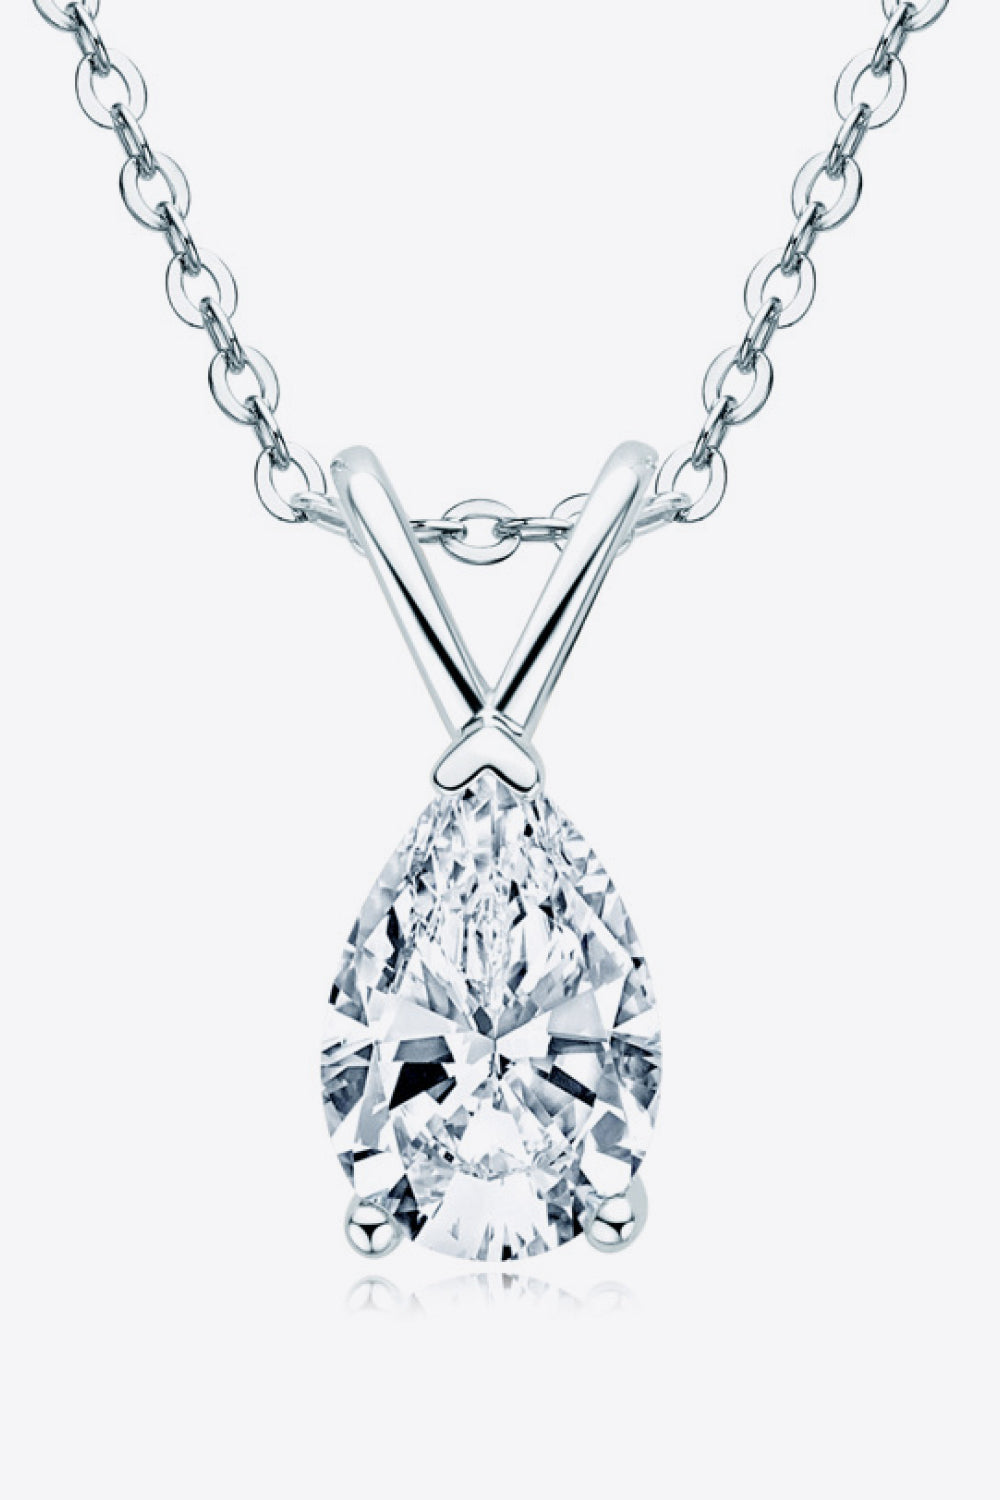 1.5 Carat Moissanite Pendant 925 Sterling Silver Necklace - Necklaces - FITGGINS